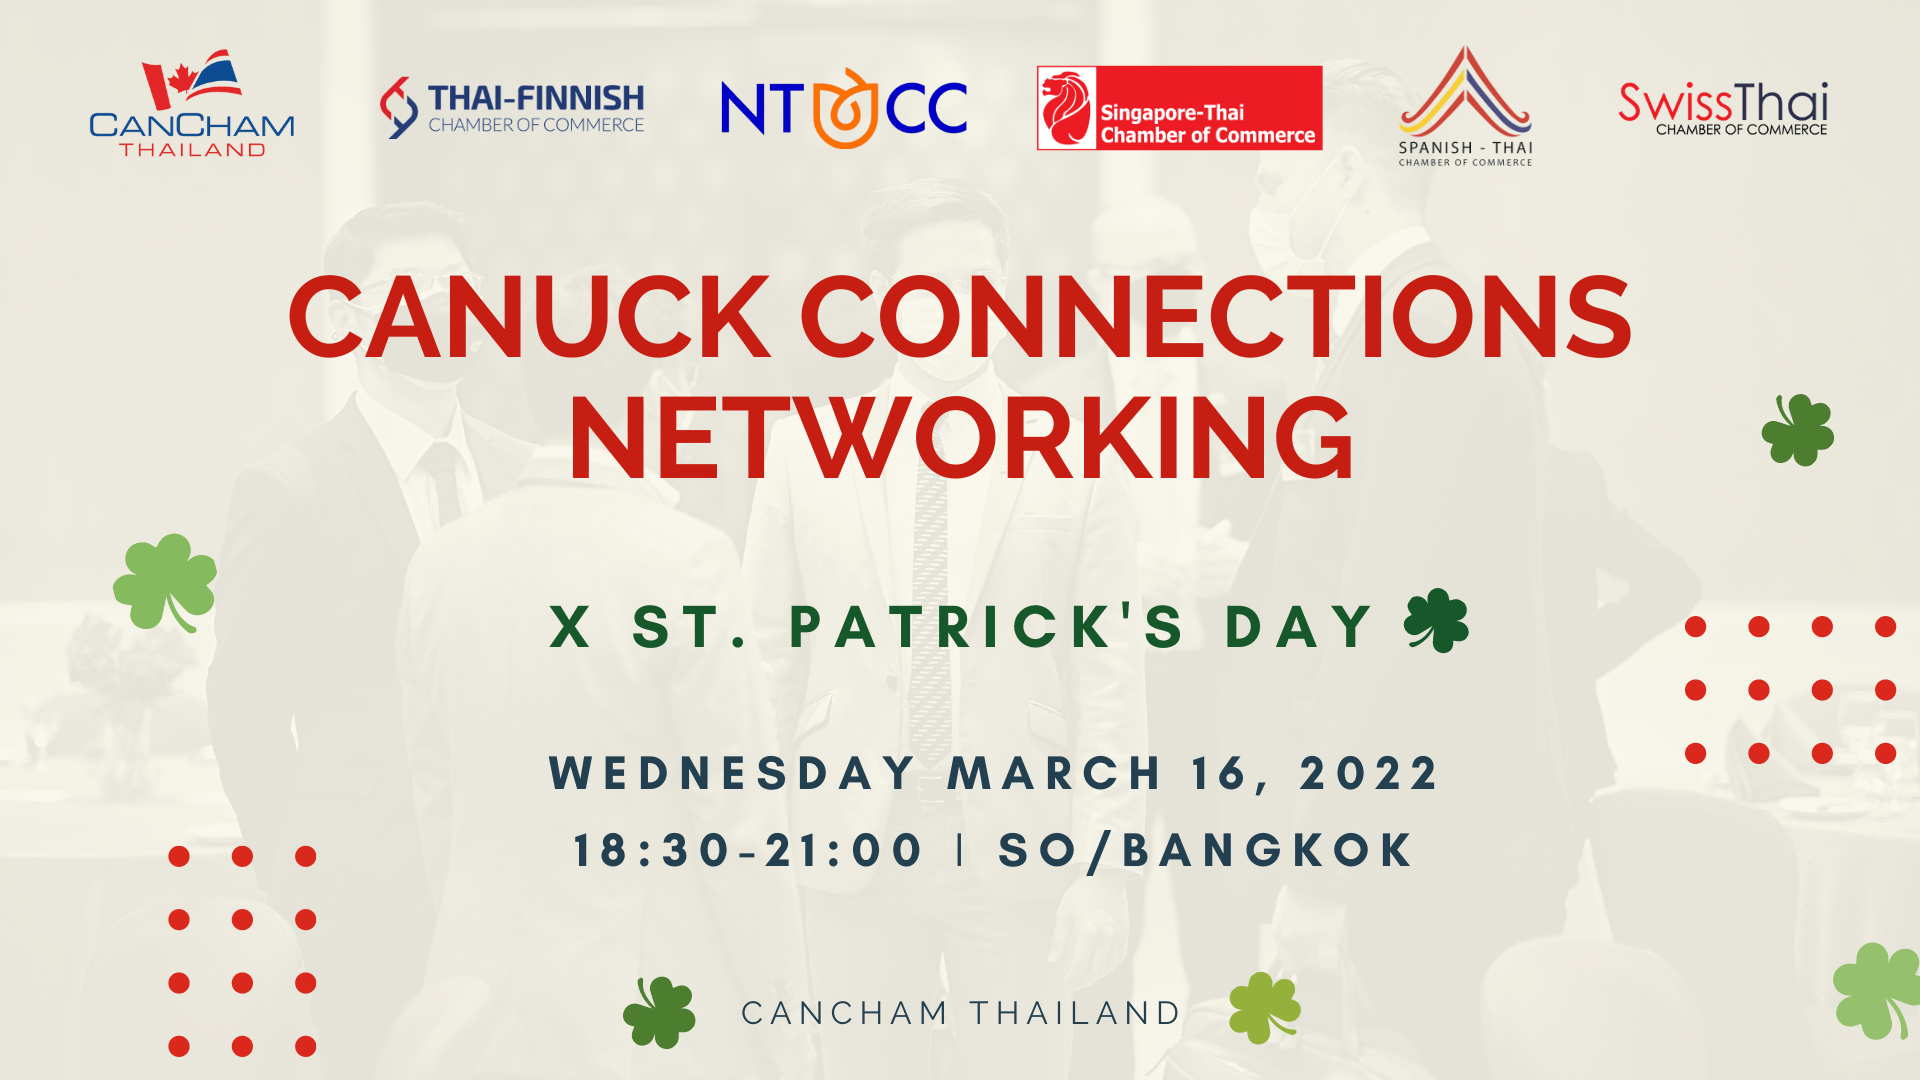 Canuck Connections Networking x St. Patrick's Day